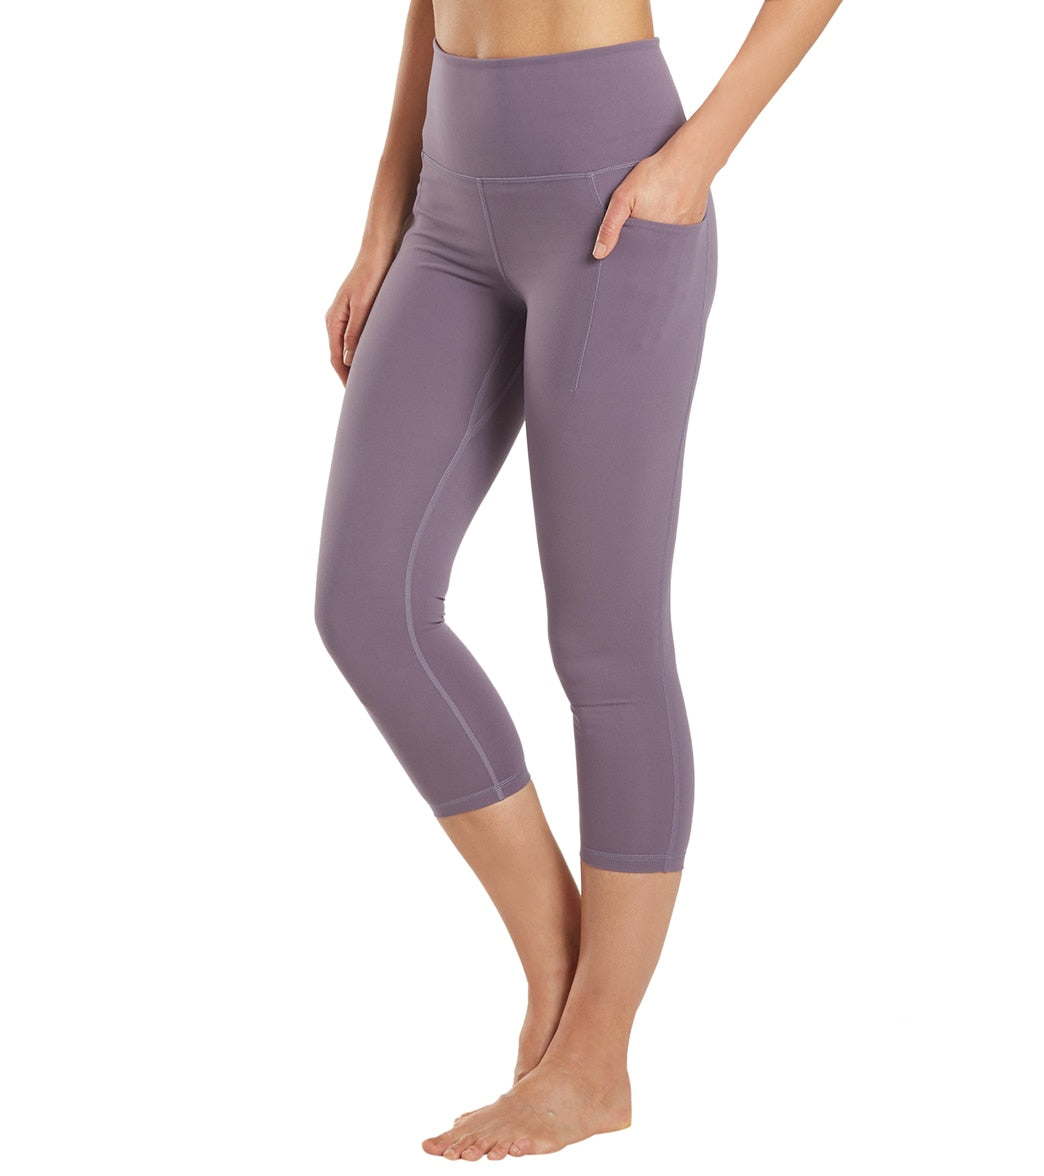 Everyday Yoga Uphold Solid High Waisted Capri Leggings With Pockets 21